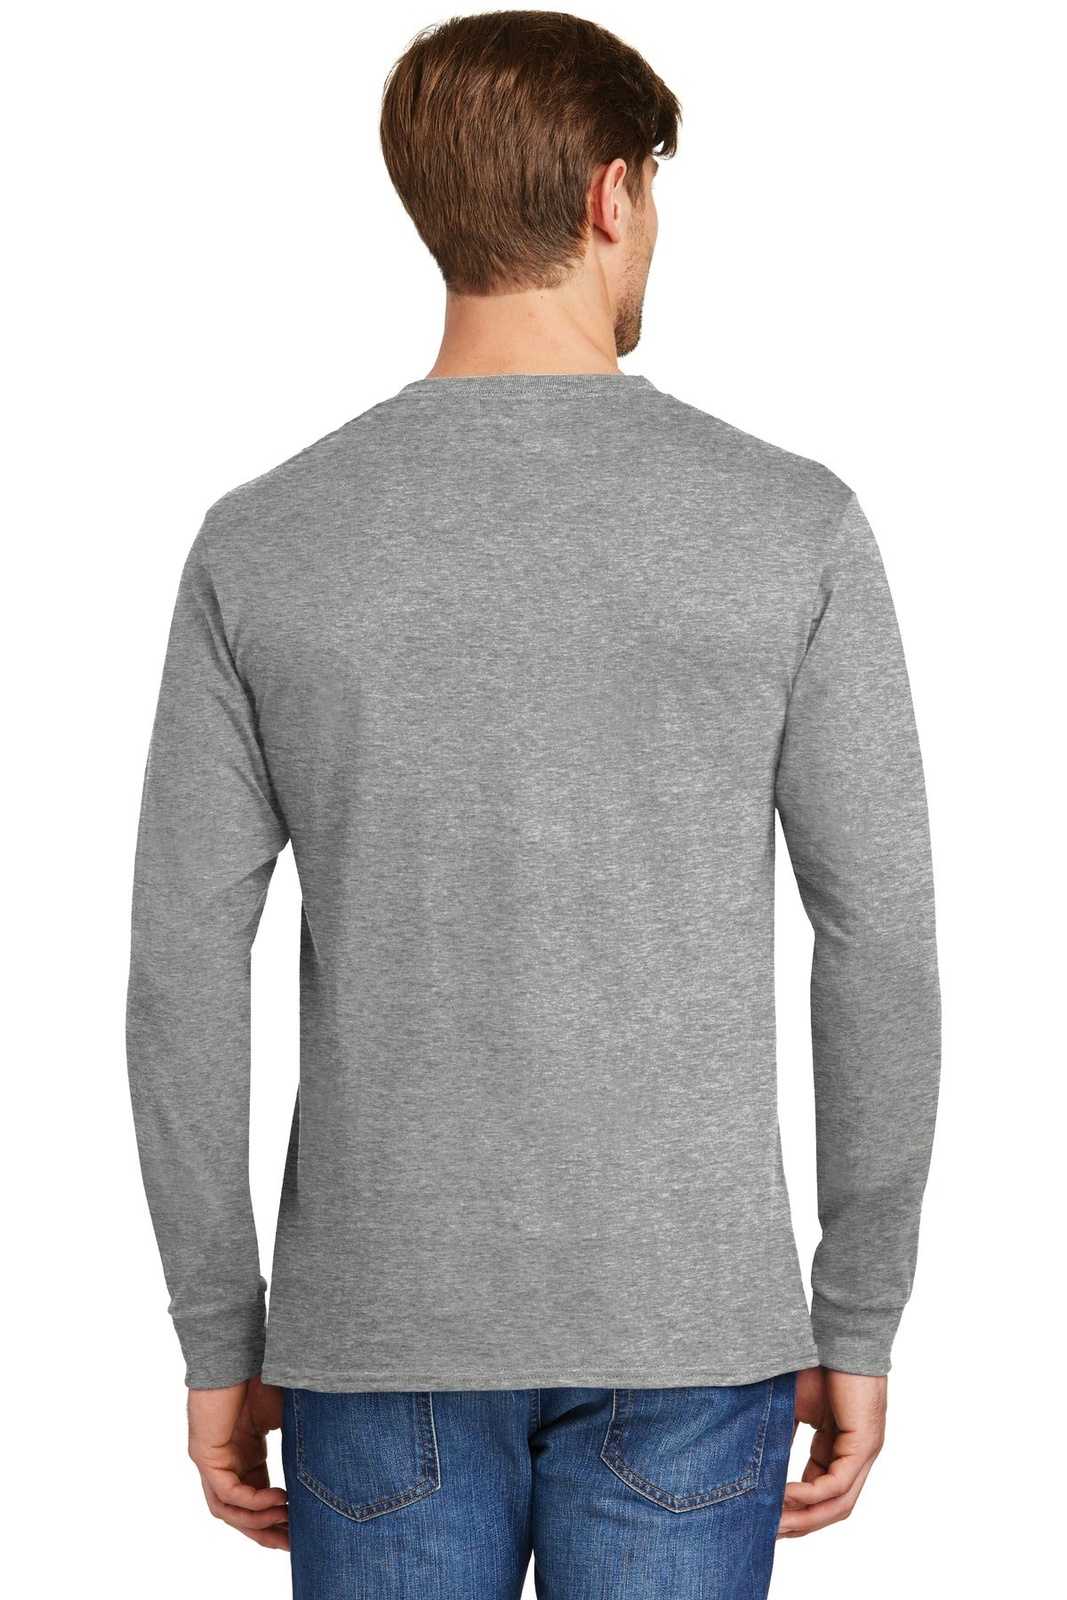 Hanes 5586 Tagless 100% Cotton Long Sleeve T-Shirt - Light Steel - HIT a Double